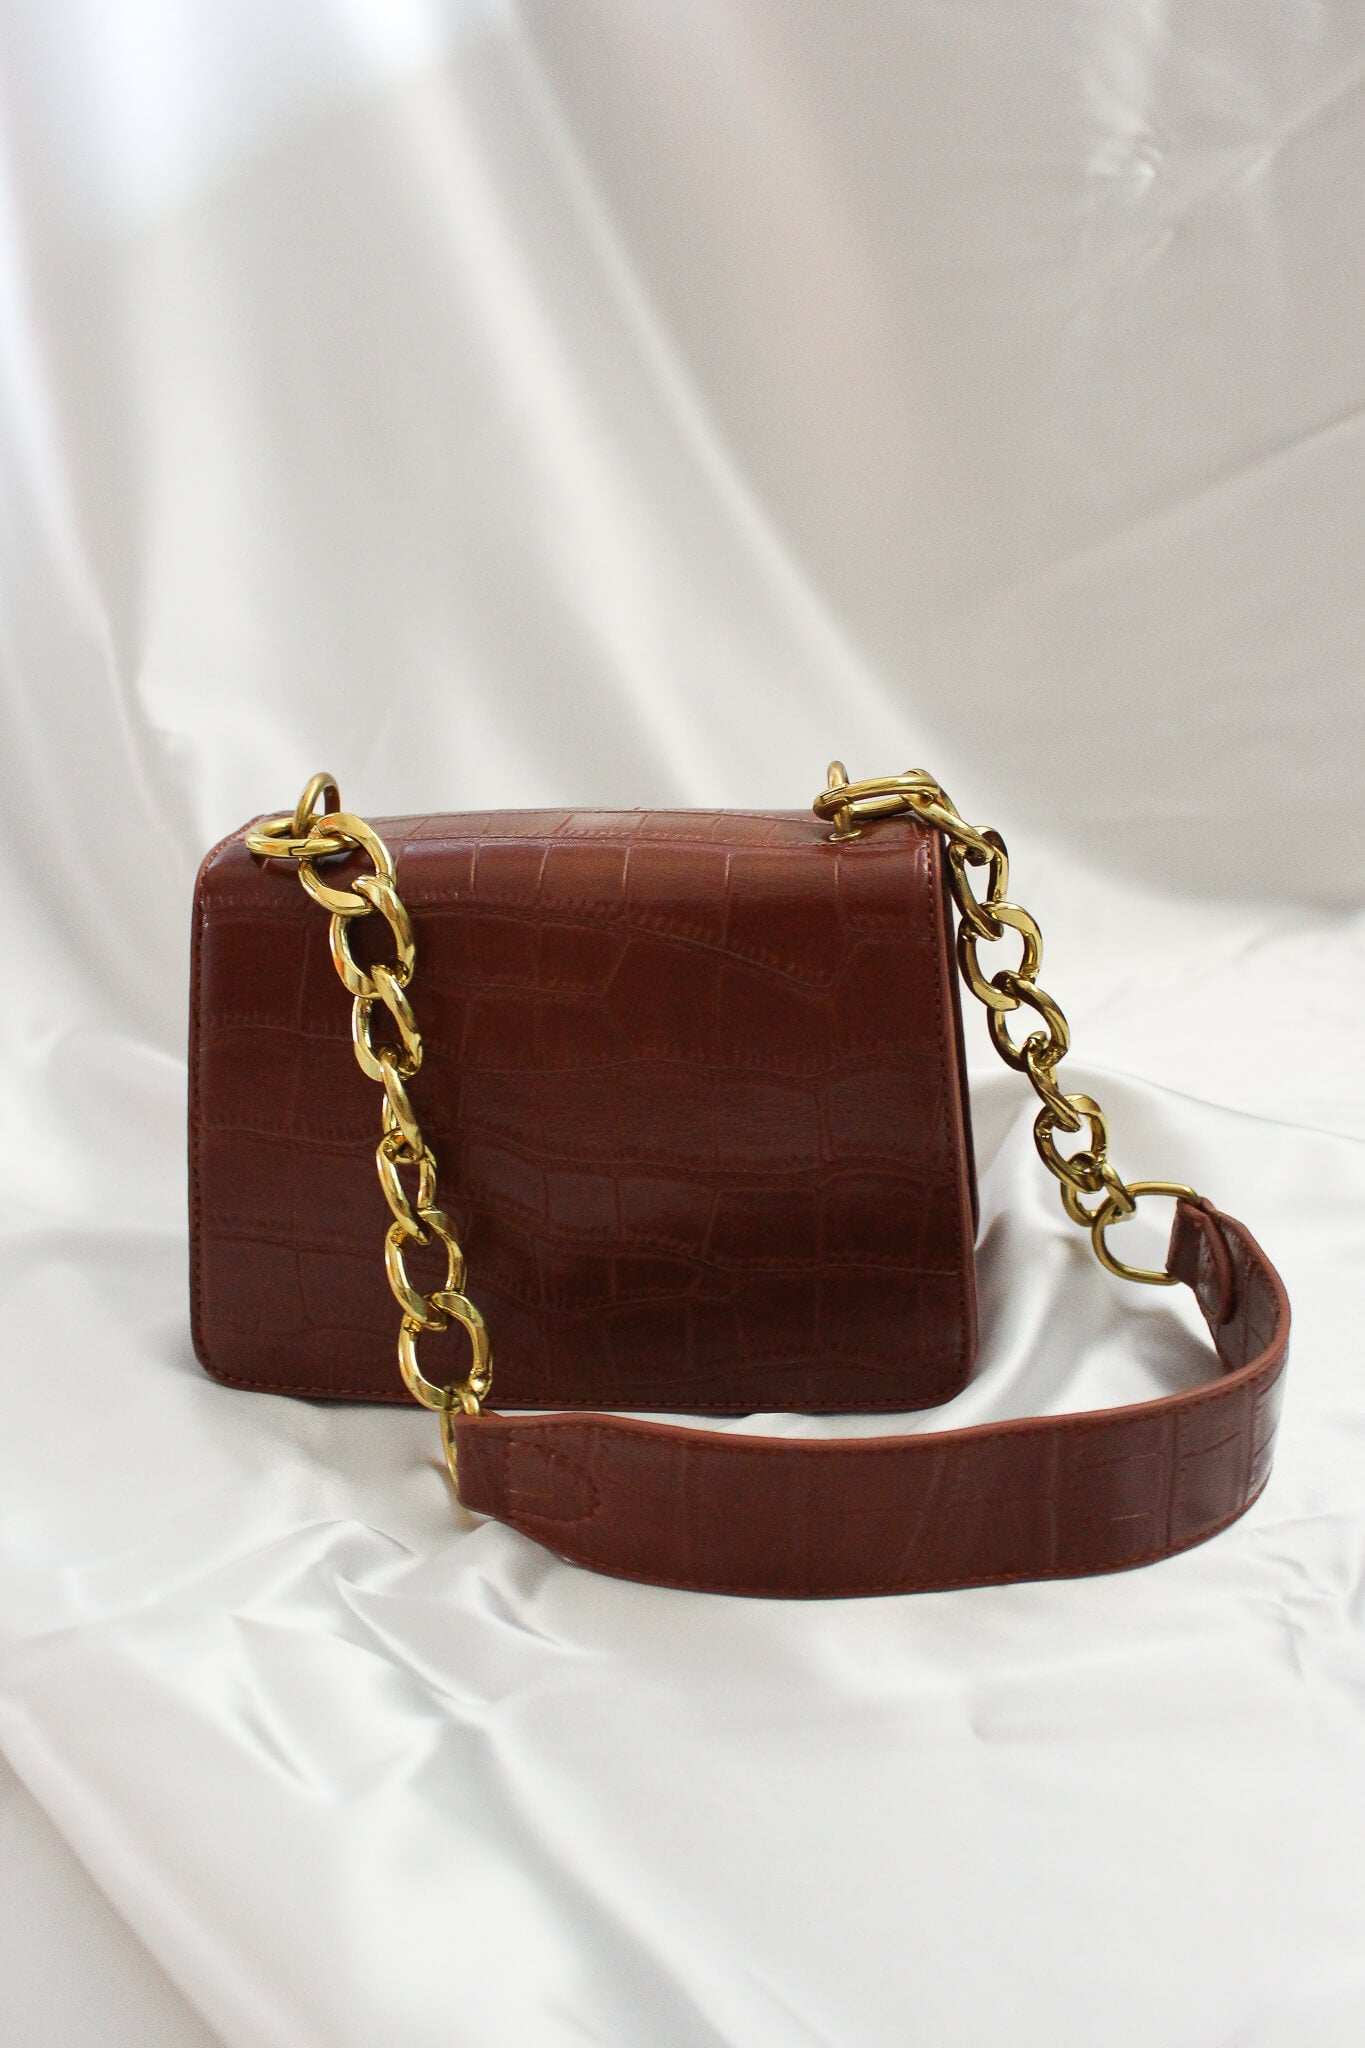 Small PU leather flap bag with changeable straps. Perfect for date nights